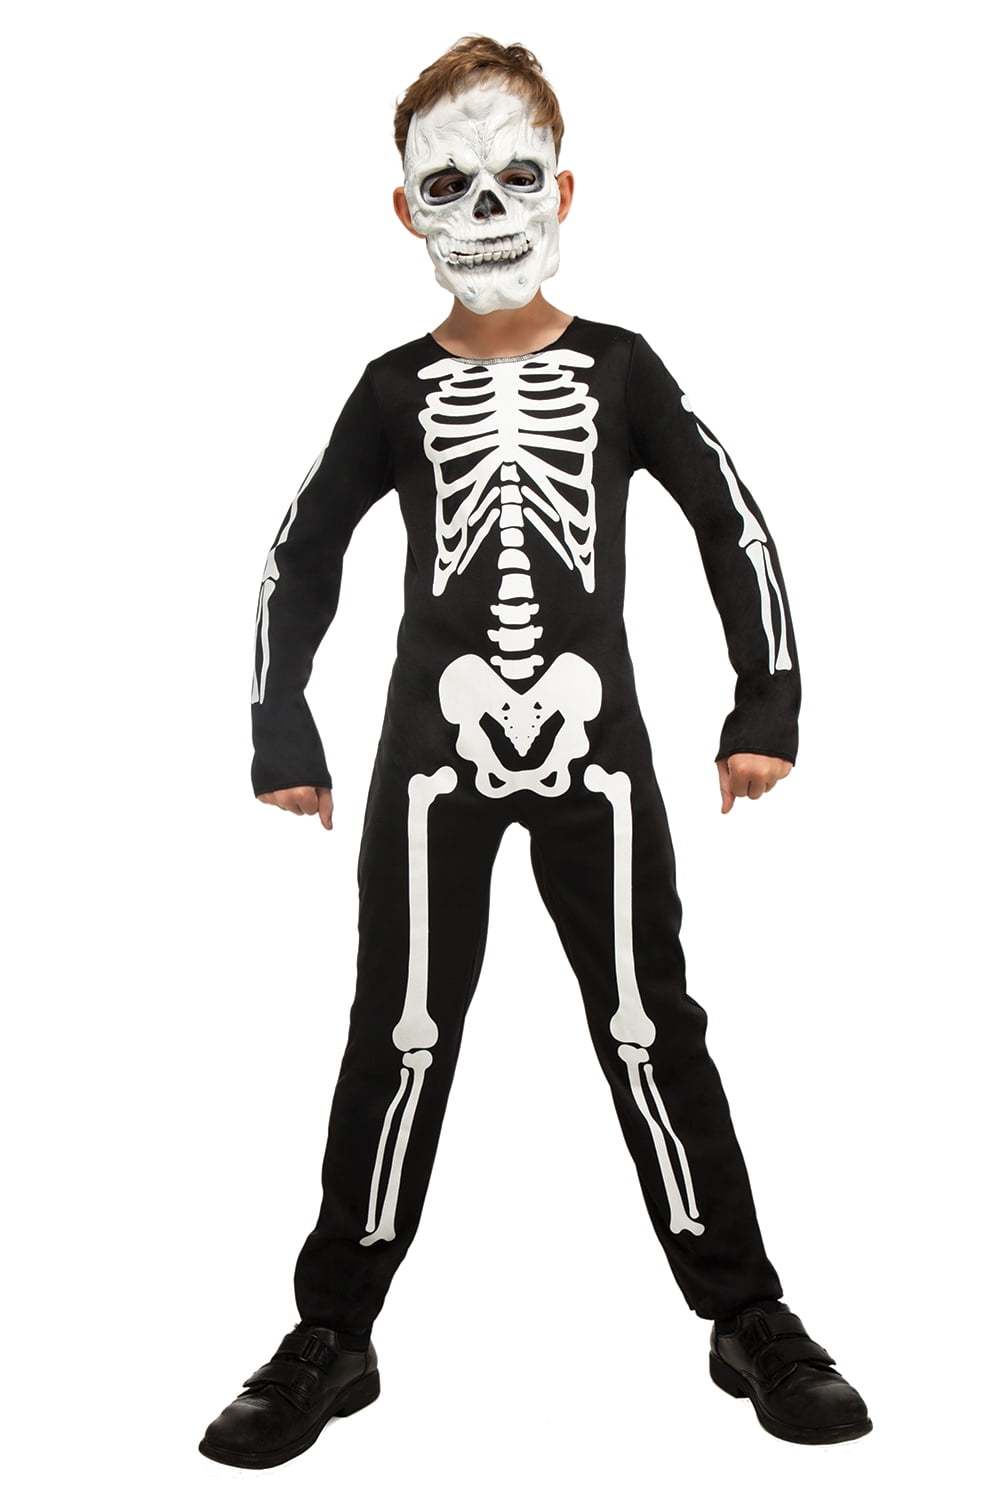 Boy Skeleton Costume Suitable For Cosplay, Party - Walmart.com